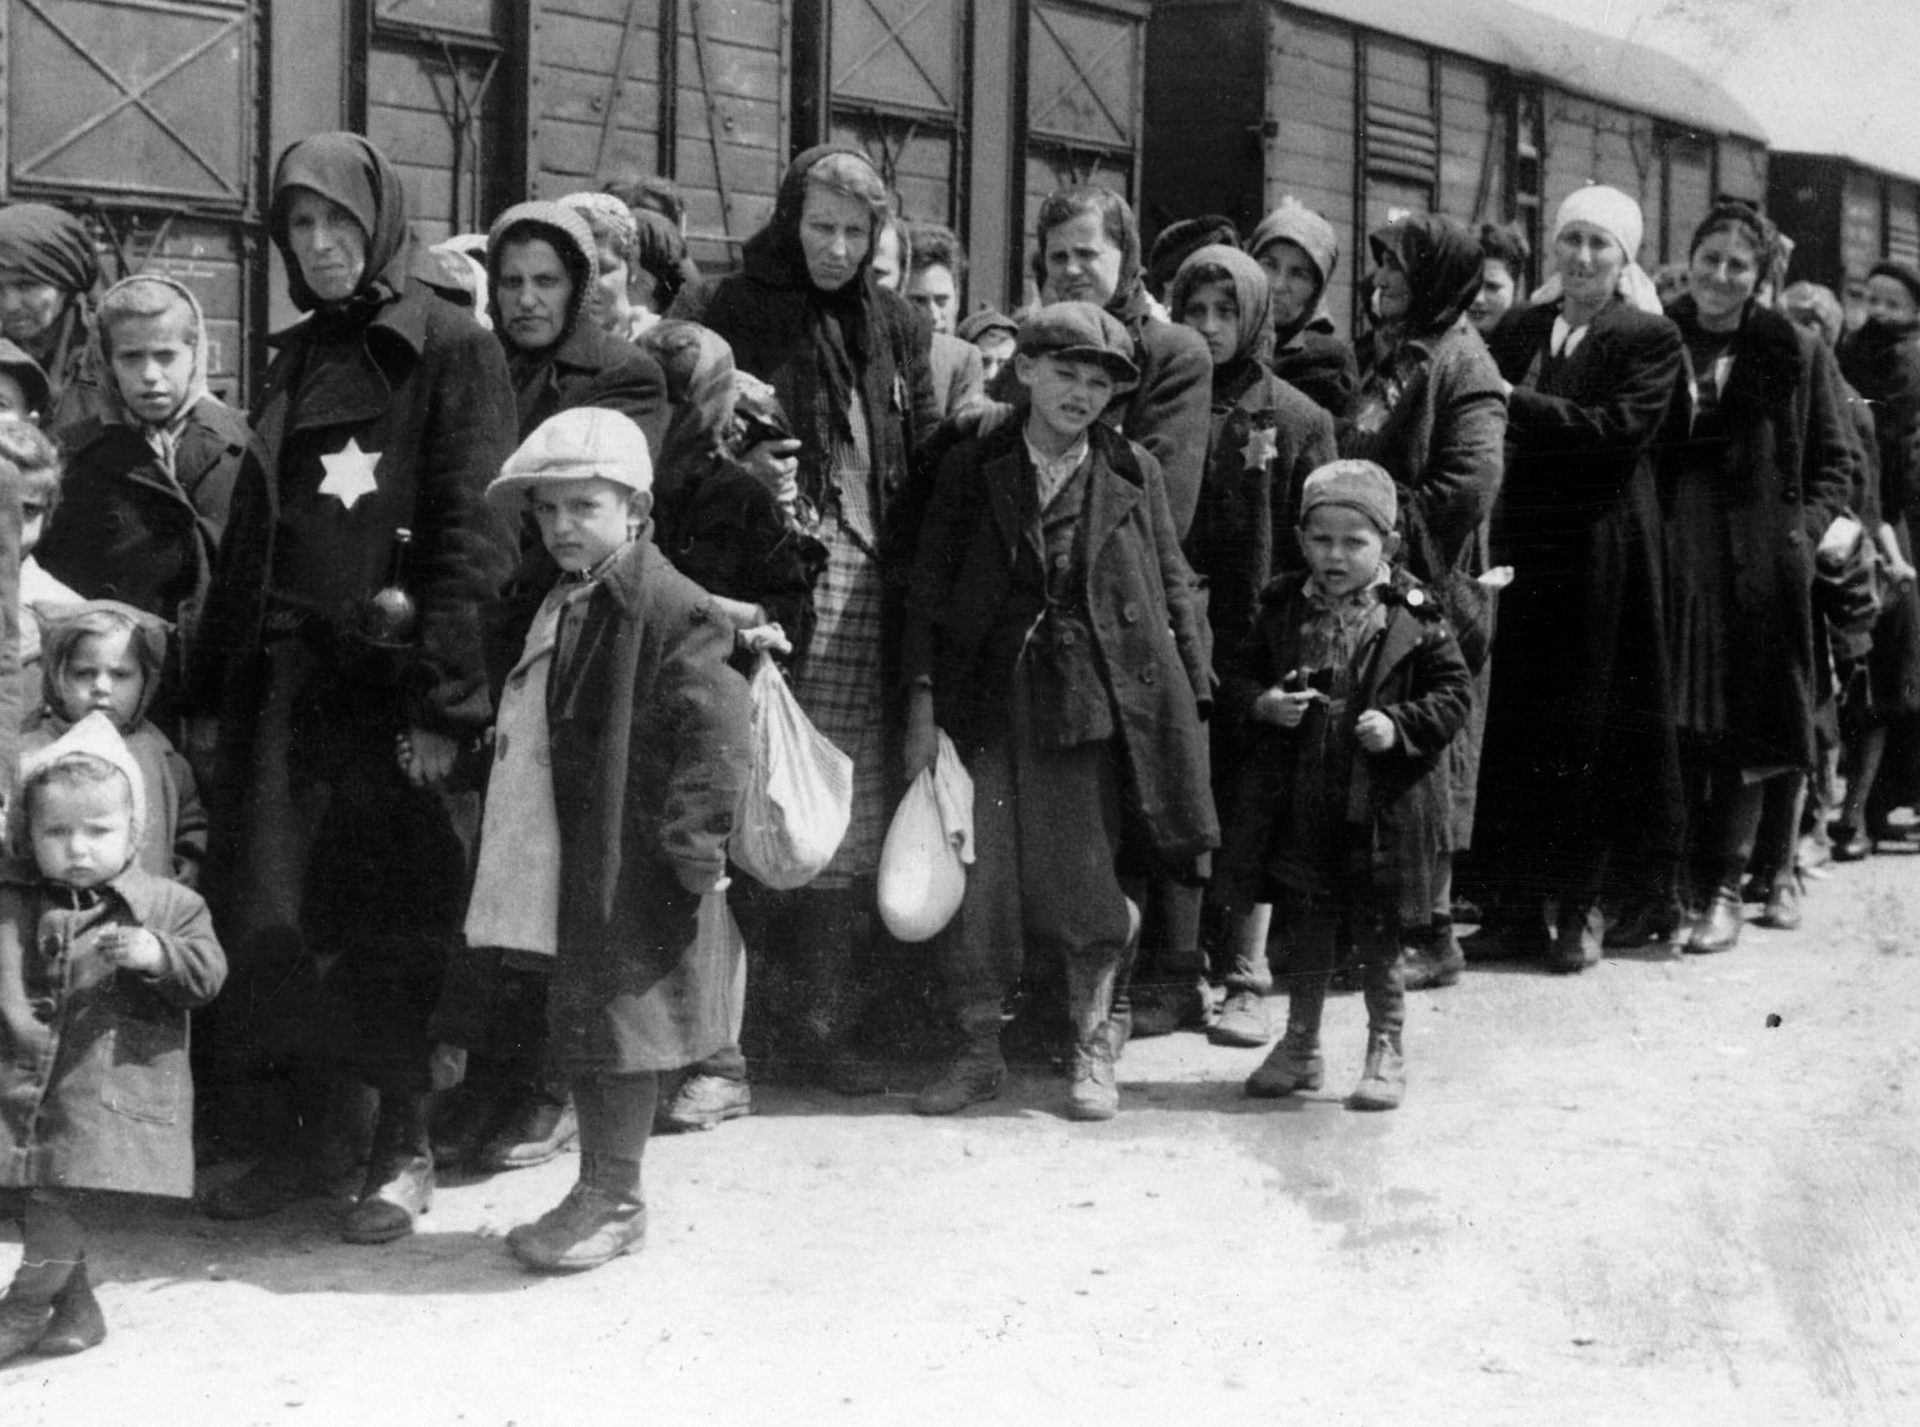 Arrival of a train containing Jews deported to Auschwitz death camp in Poland. Auschwitz-Birkenau (1940-1945) was the largest of the German Concentration and Extermination camps. 1.1 million people, 90 per cent of them Jews are thought to have died there